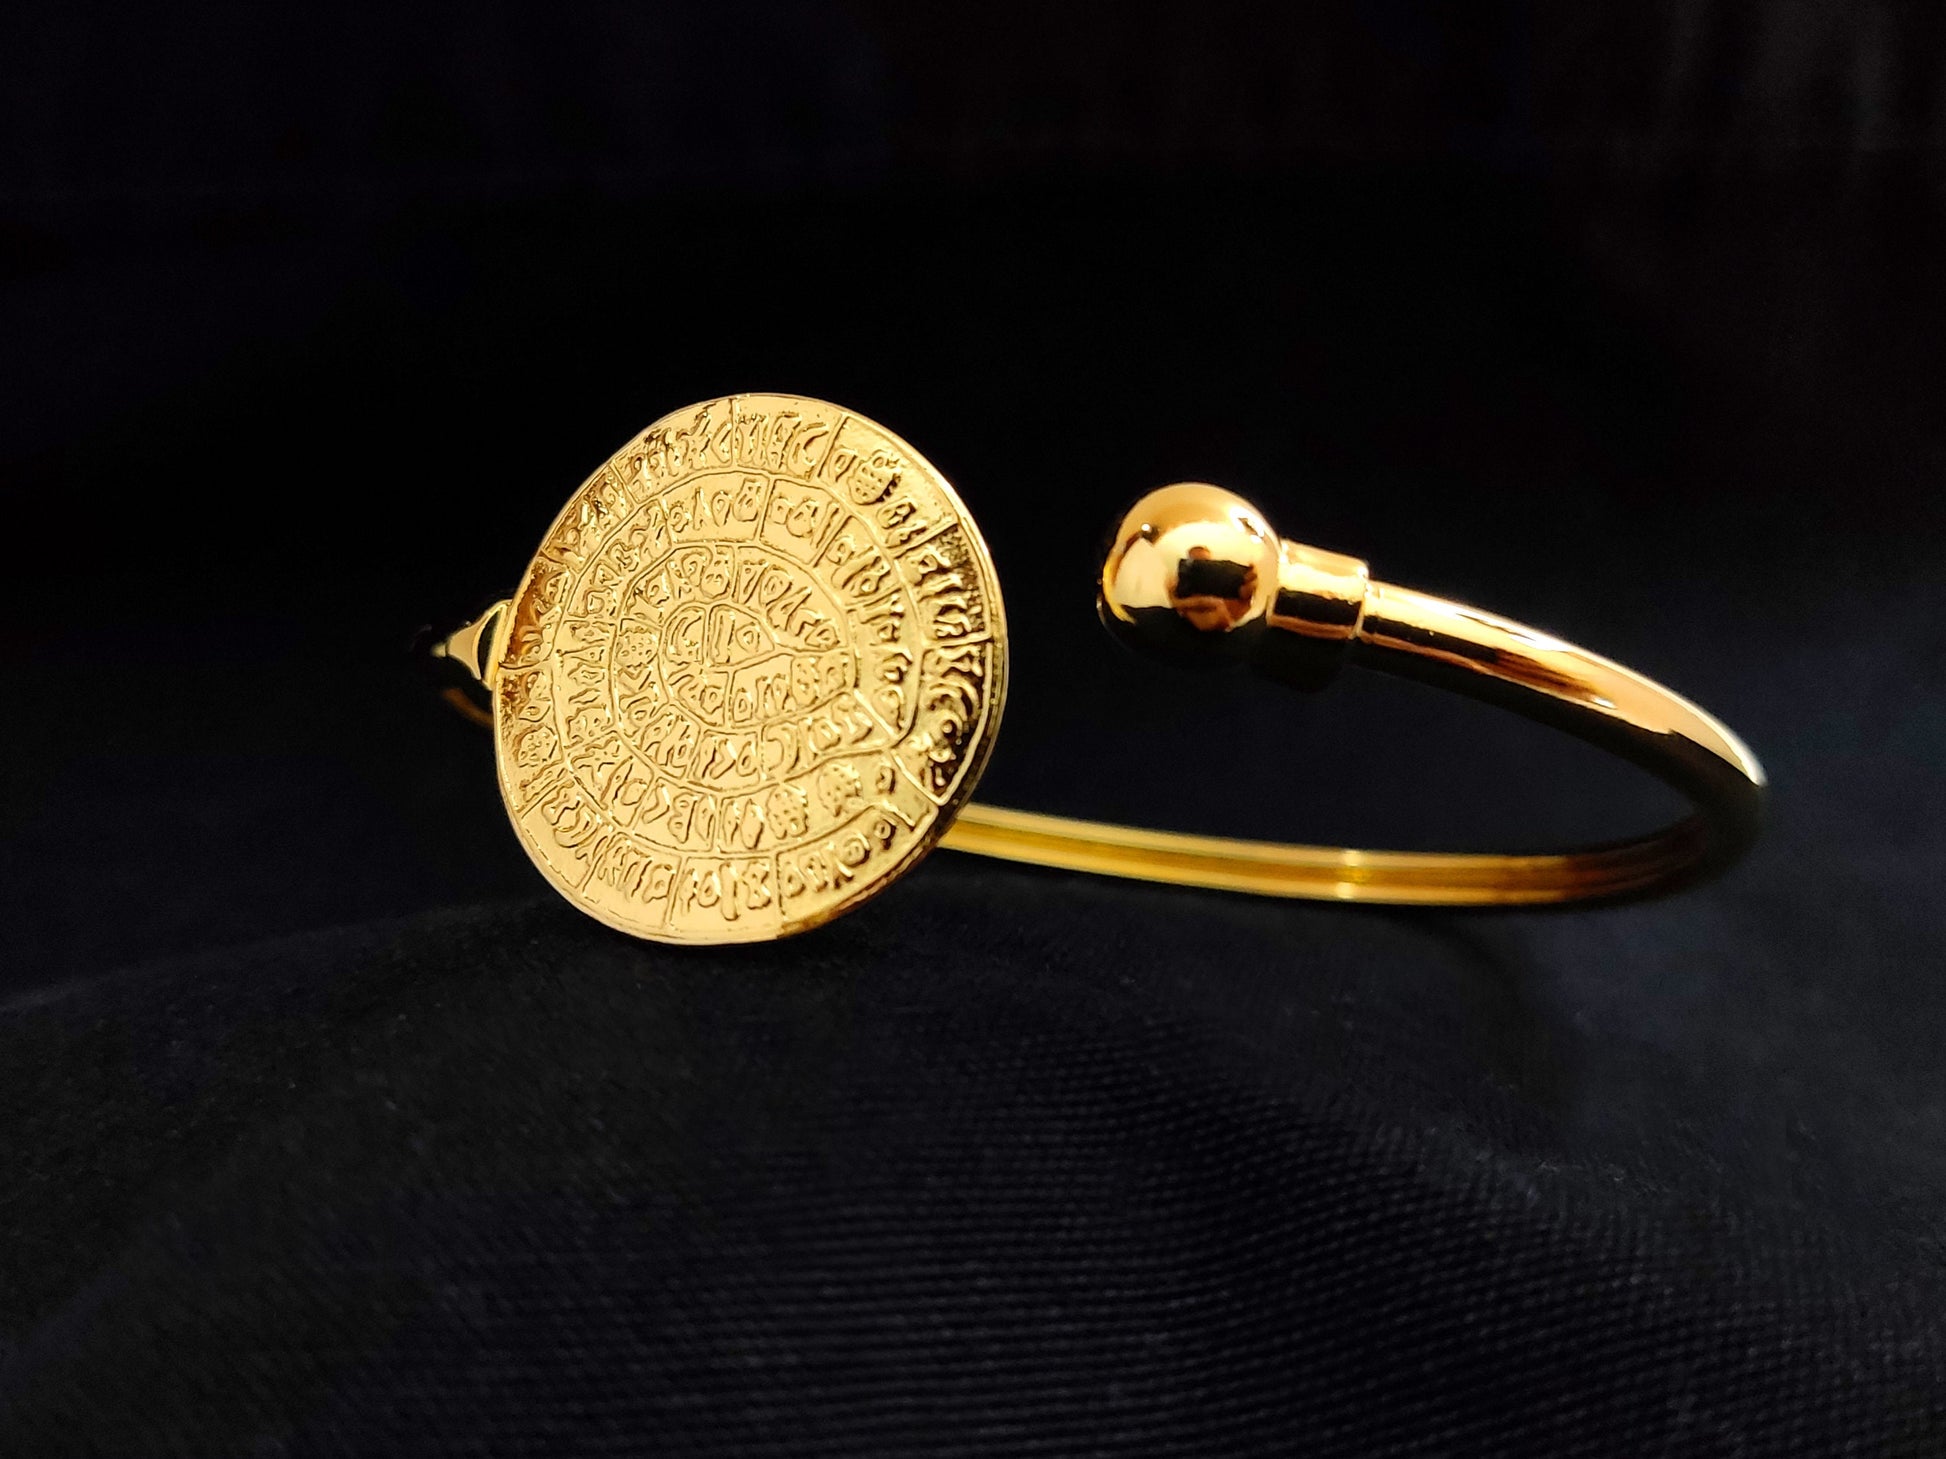 Sterling Silver 925 bracelet with 22K gold plating and ancient Greek Phaistos Disc as centerpiece. Disc measures 23 mm in diameter and bracelet has a circumference of 18.5 - 19 cm. Brand new and hallmarked 925, proudly made in Greece.